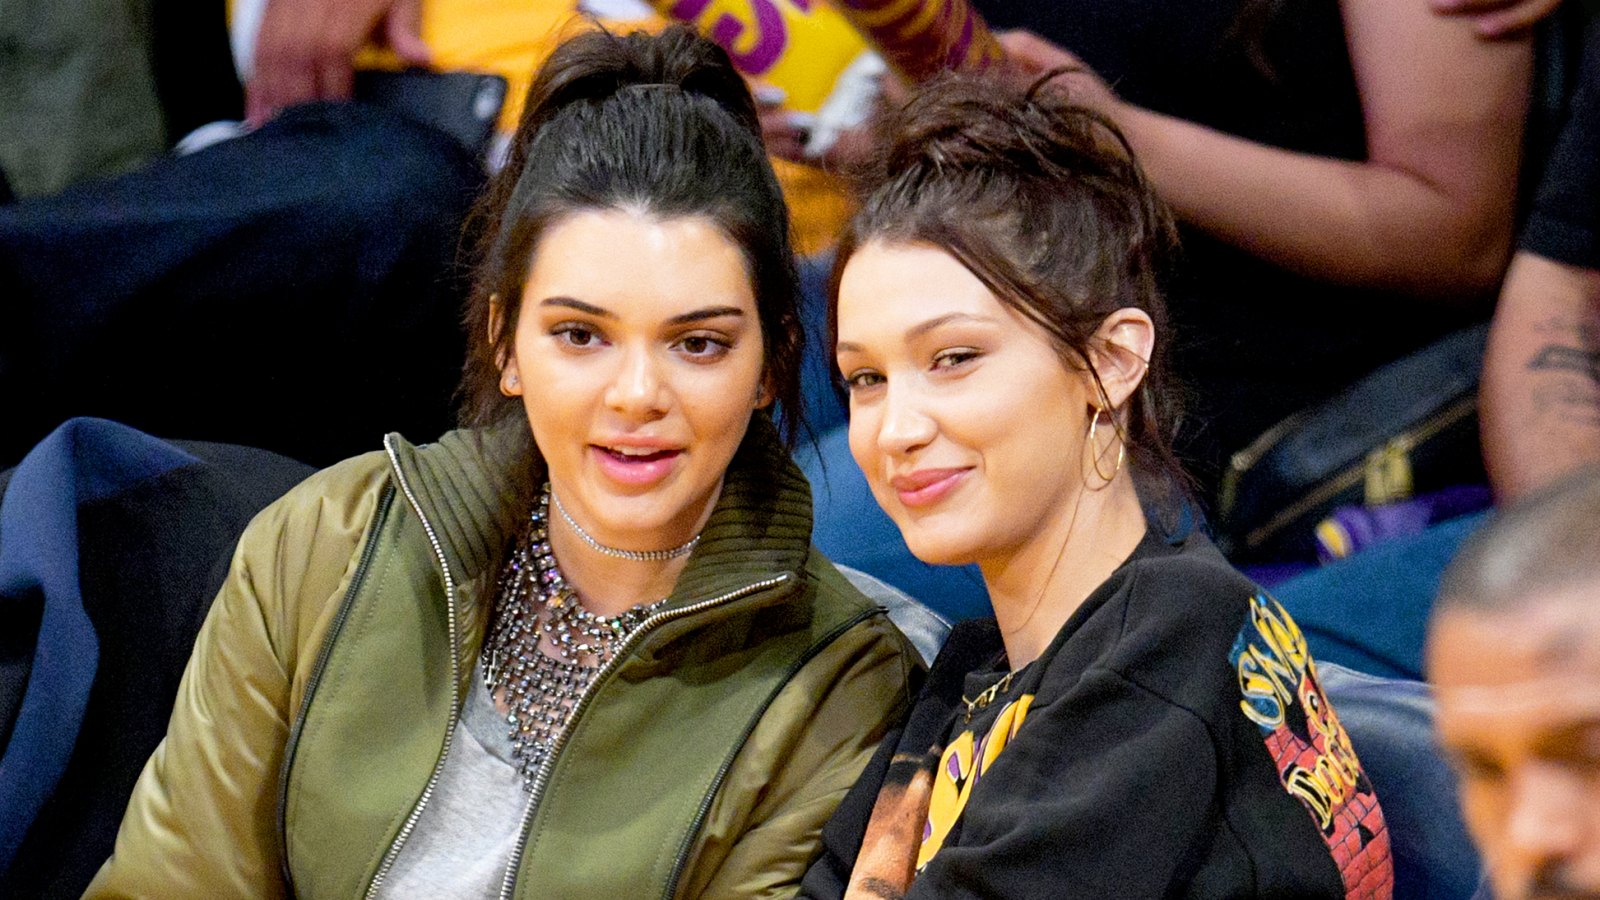 Kendall Jenner and Bella Hadid attend a 2016 basketball game between the Dallas Mavericks and the Los Angeles Lakers at Staples Center in Los Angeles, California.